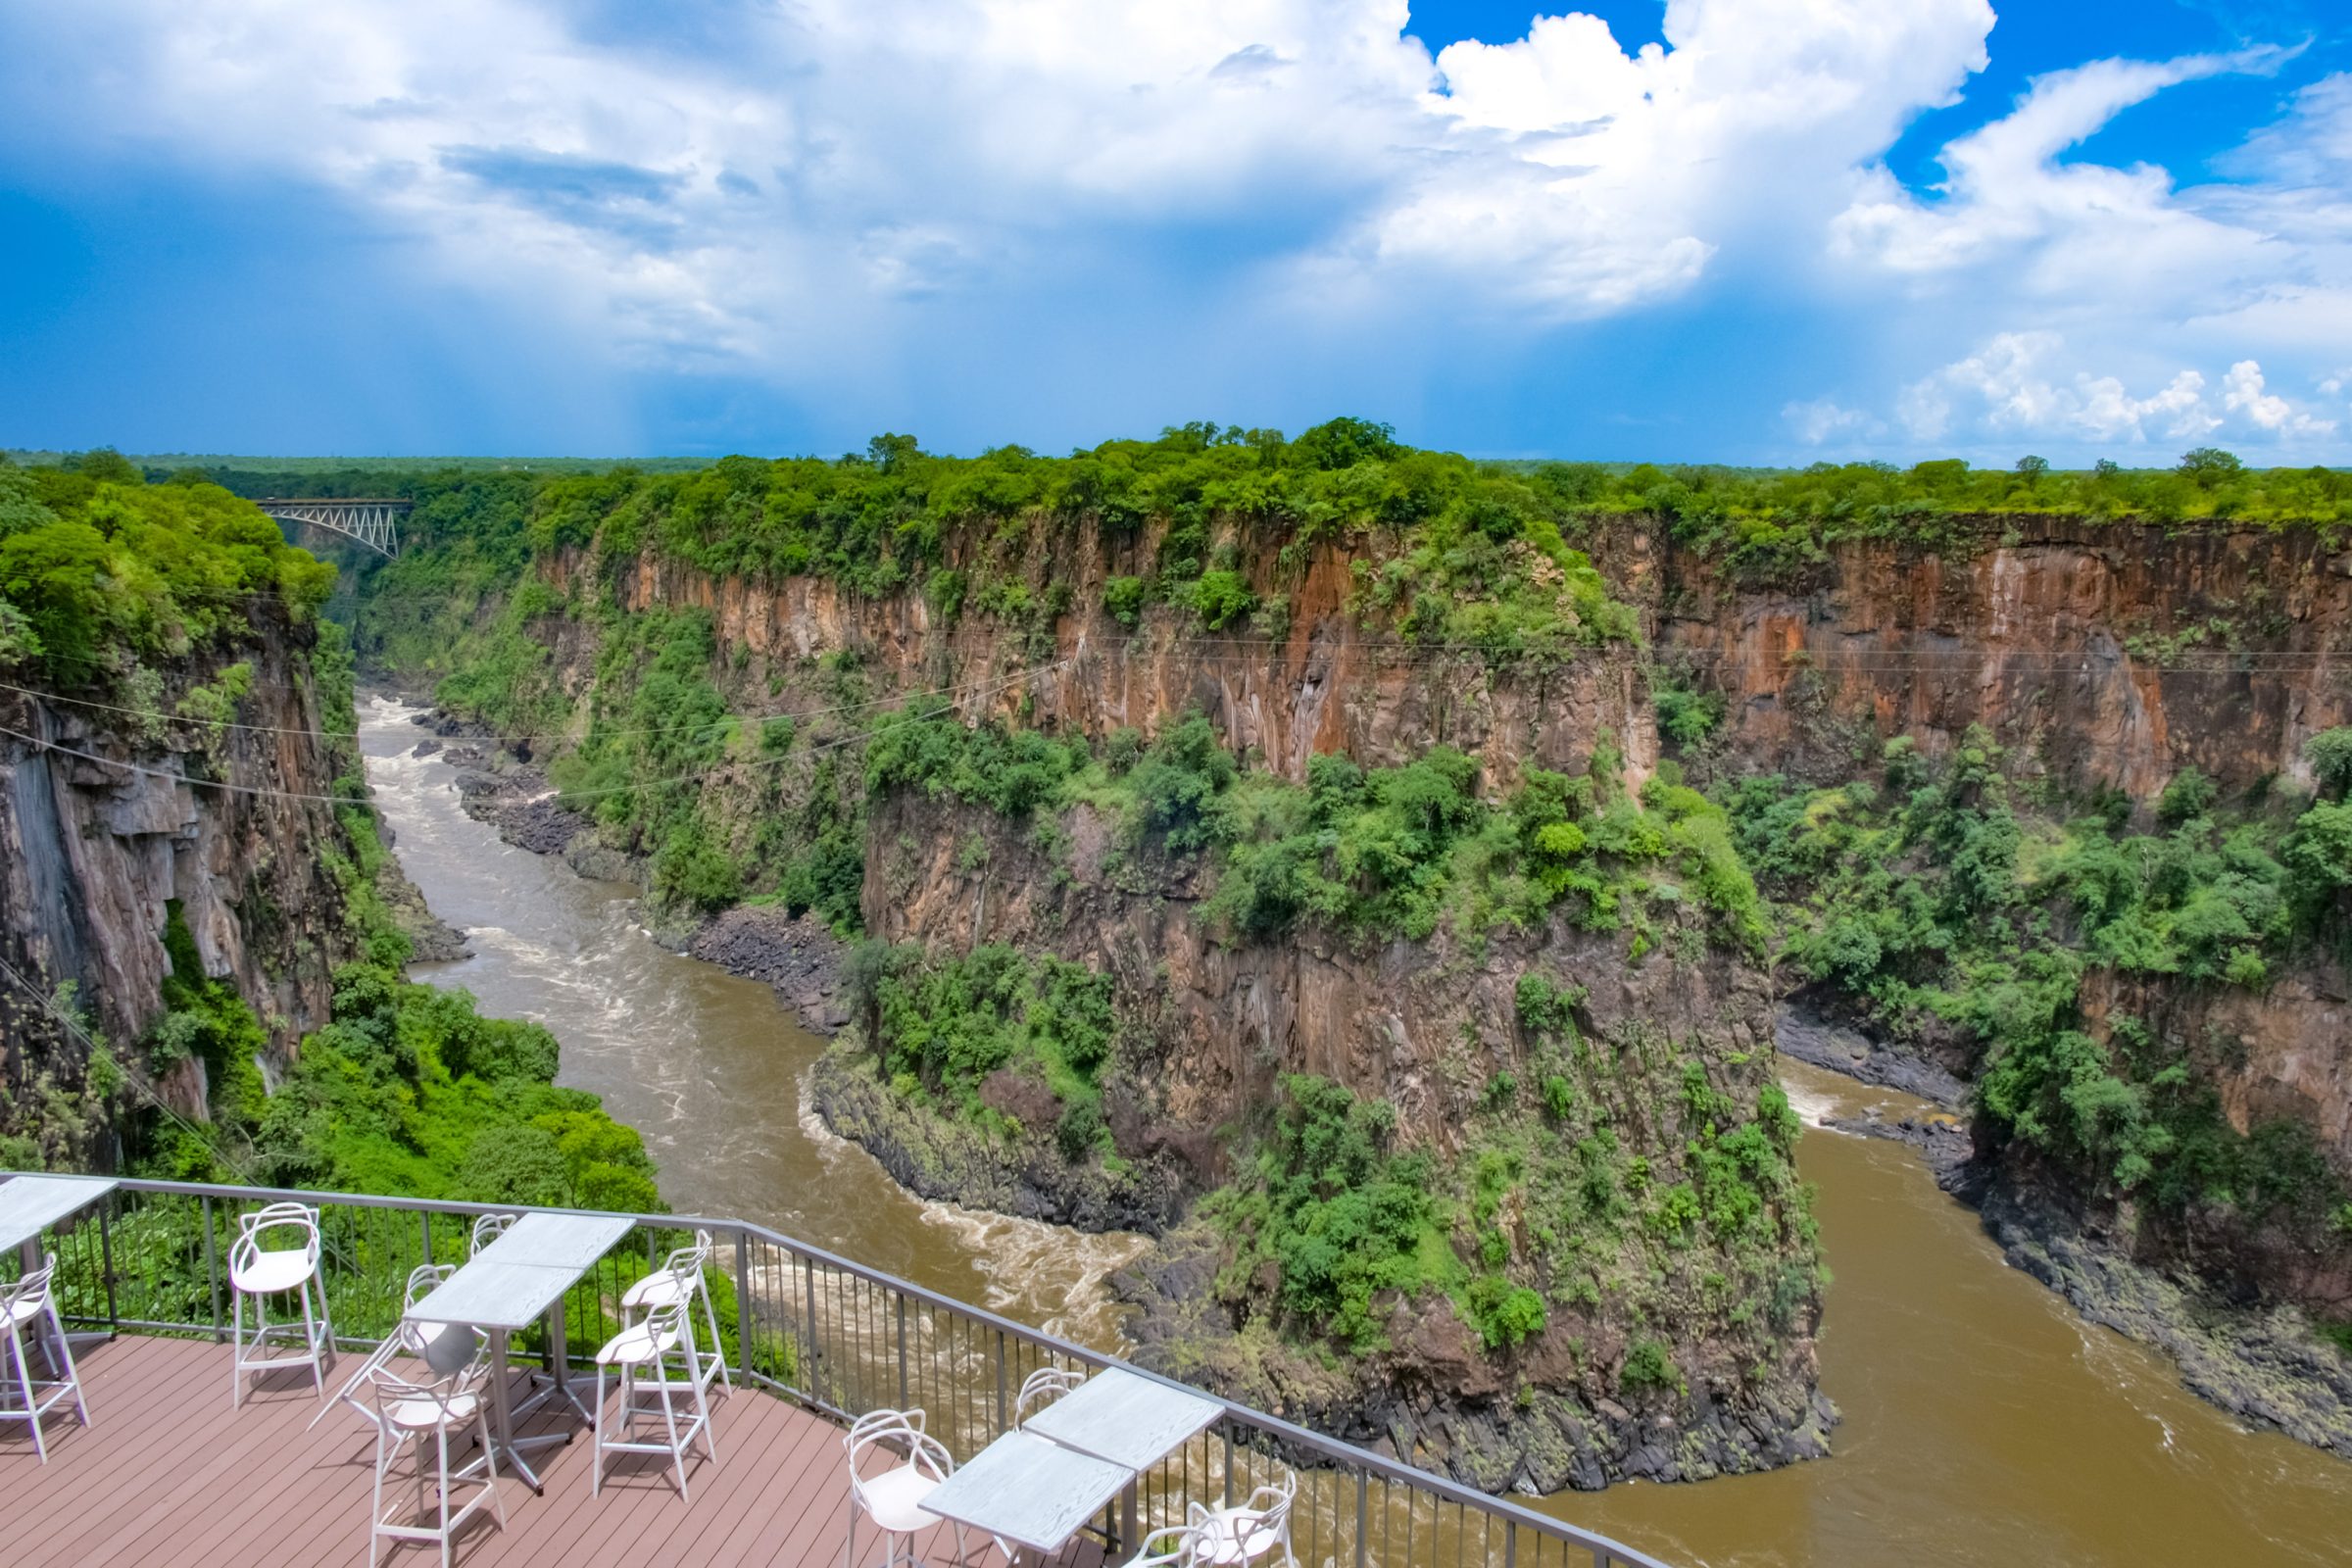 View from The Lookout Café with the Victoria Falls Bridge in the background